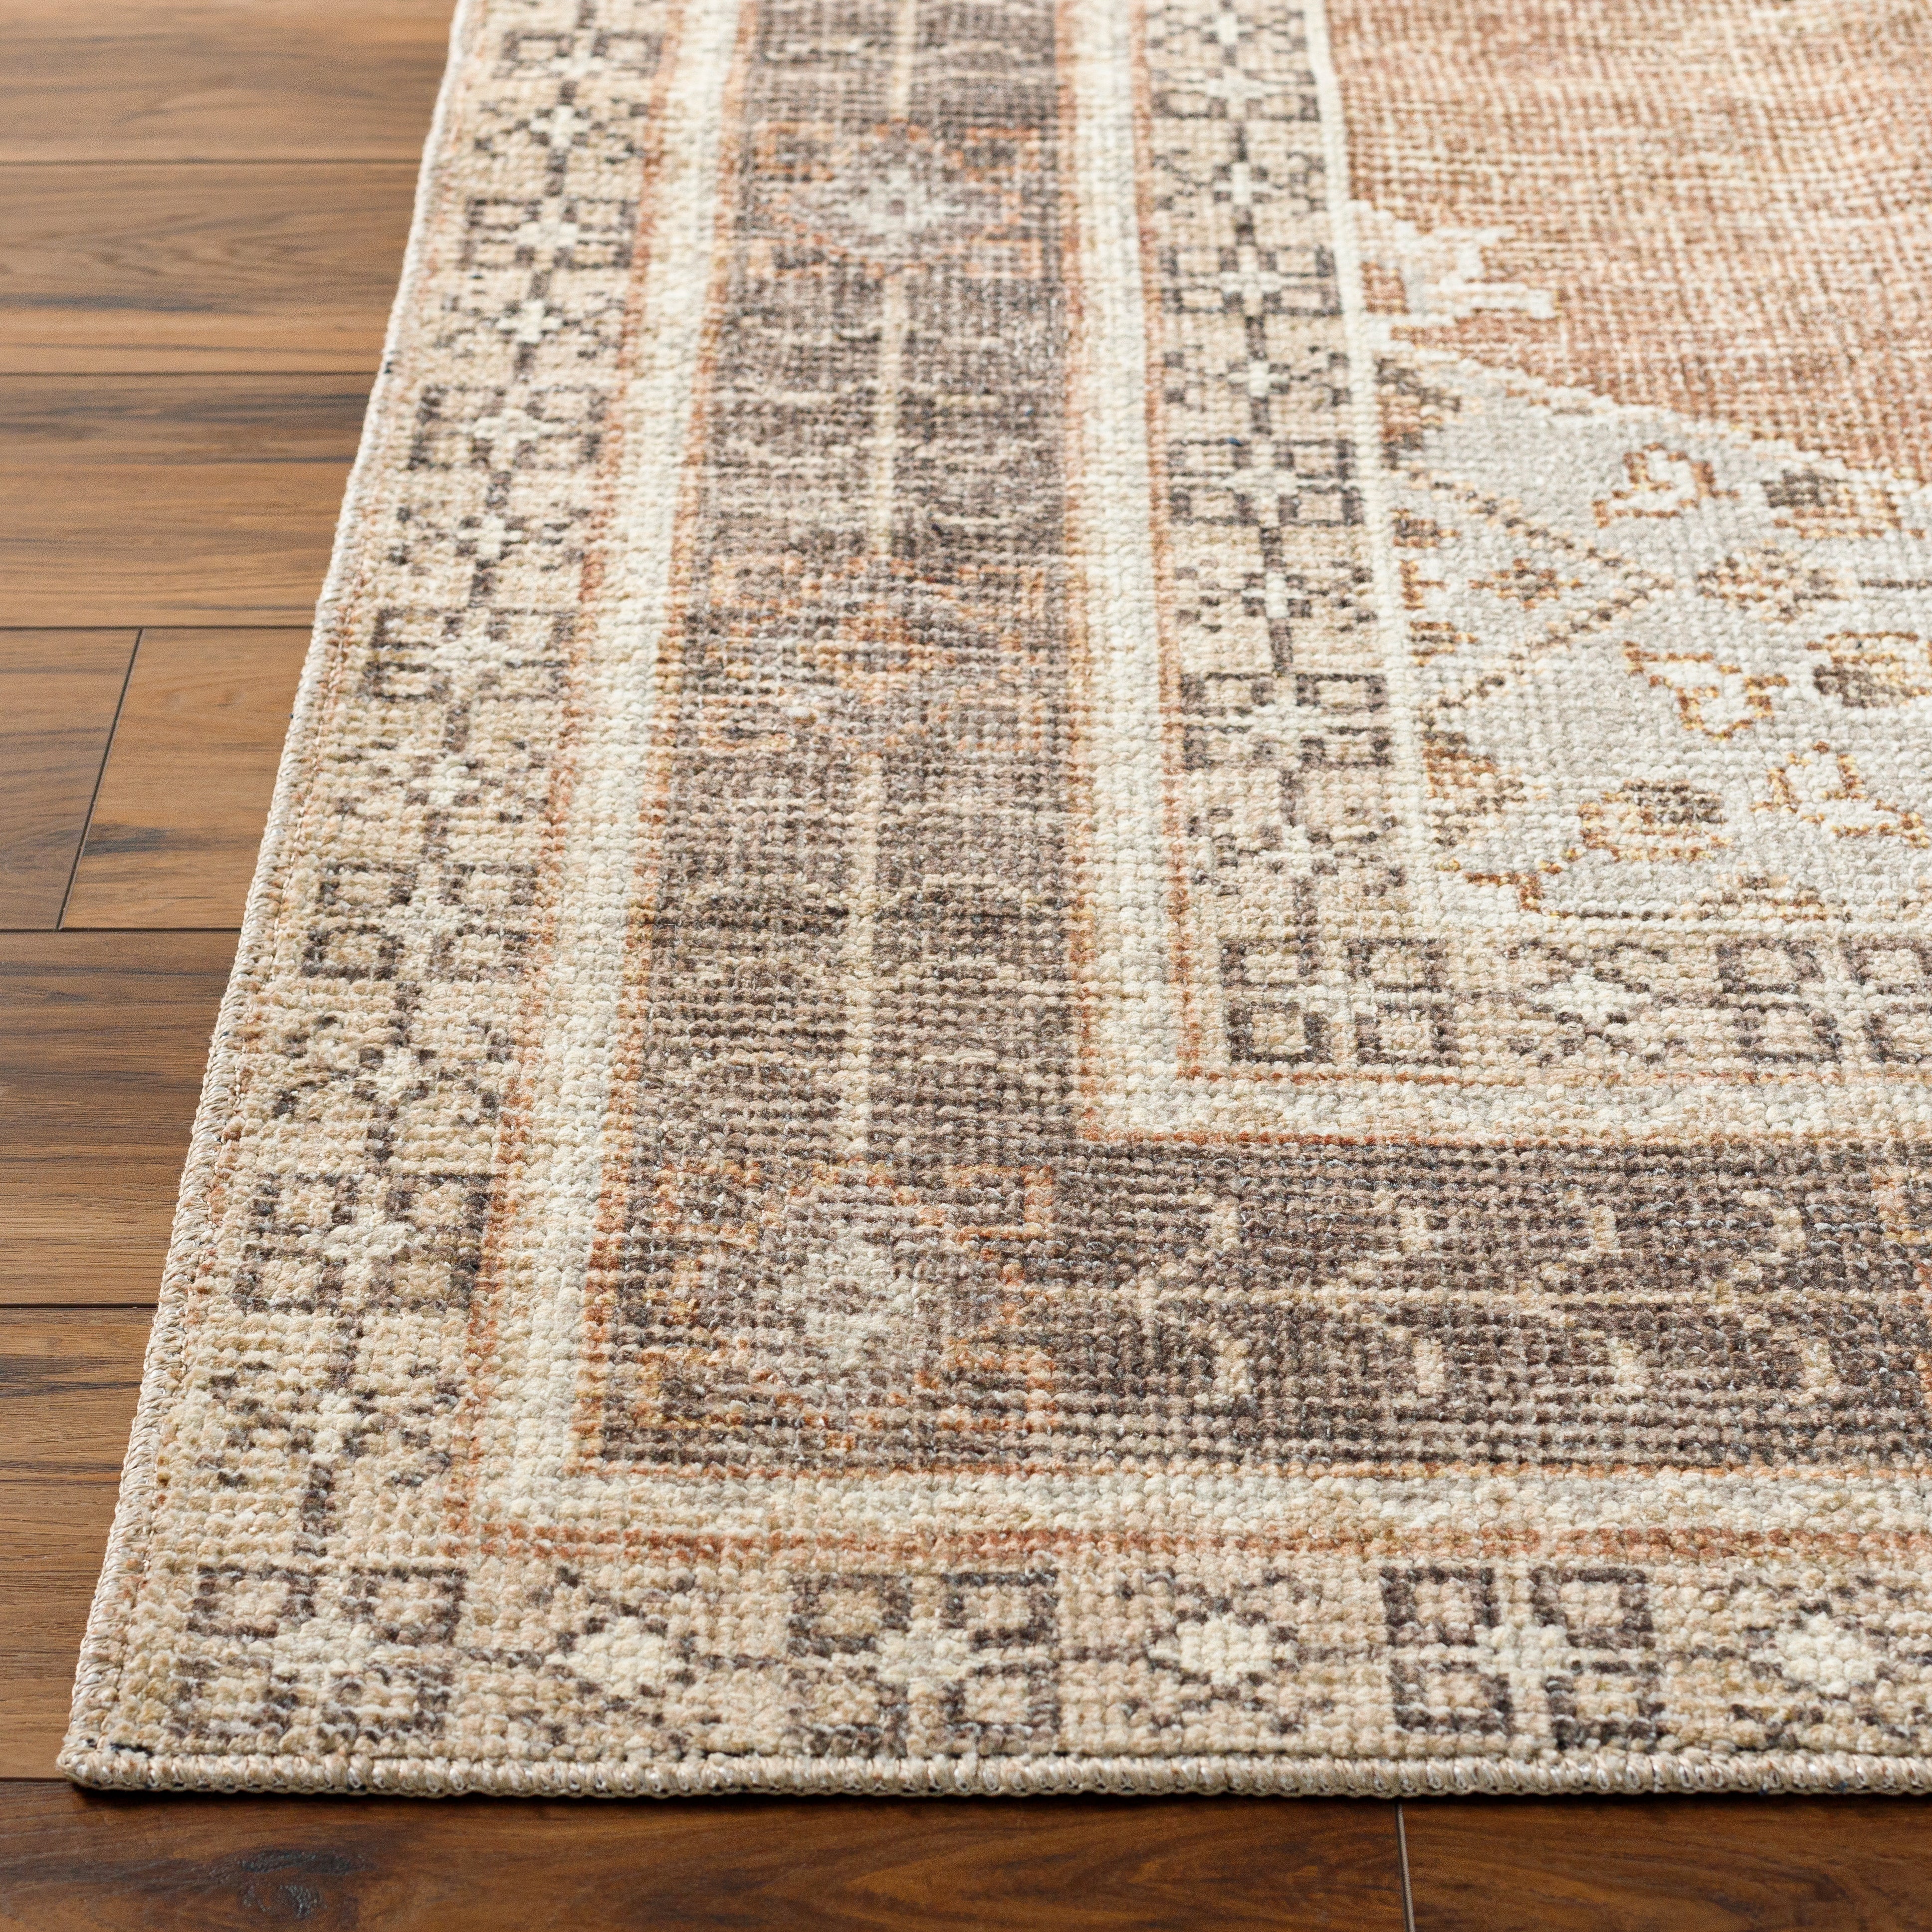 Brought to you by Becki Owens x Surya, the Lila Tan medallion area rug combines rich, detailed design with warm soft neutrals and tones to create an inviting space that will always feel familiar. Amethyst Home provides interior design, new construction, custom furniture, and area rugs in the Austin metro area.